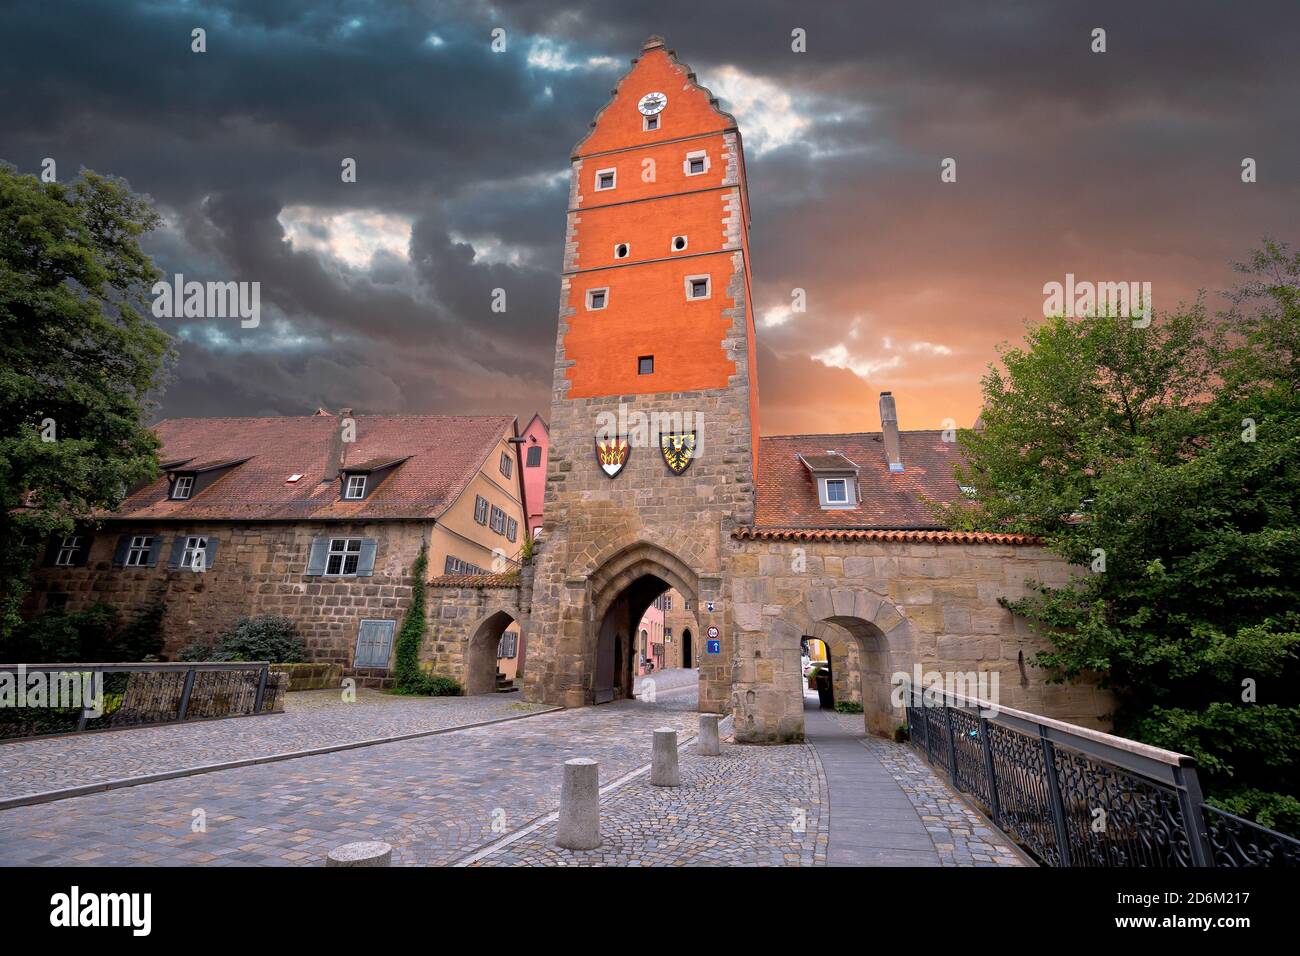 Historic town of Dinkelsbuhl tower gate view, Romantic road of Bavaria region of Germany Stock Photo